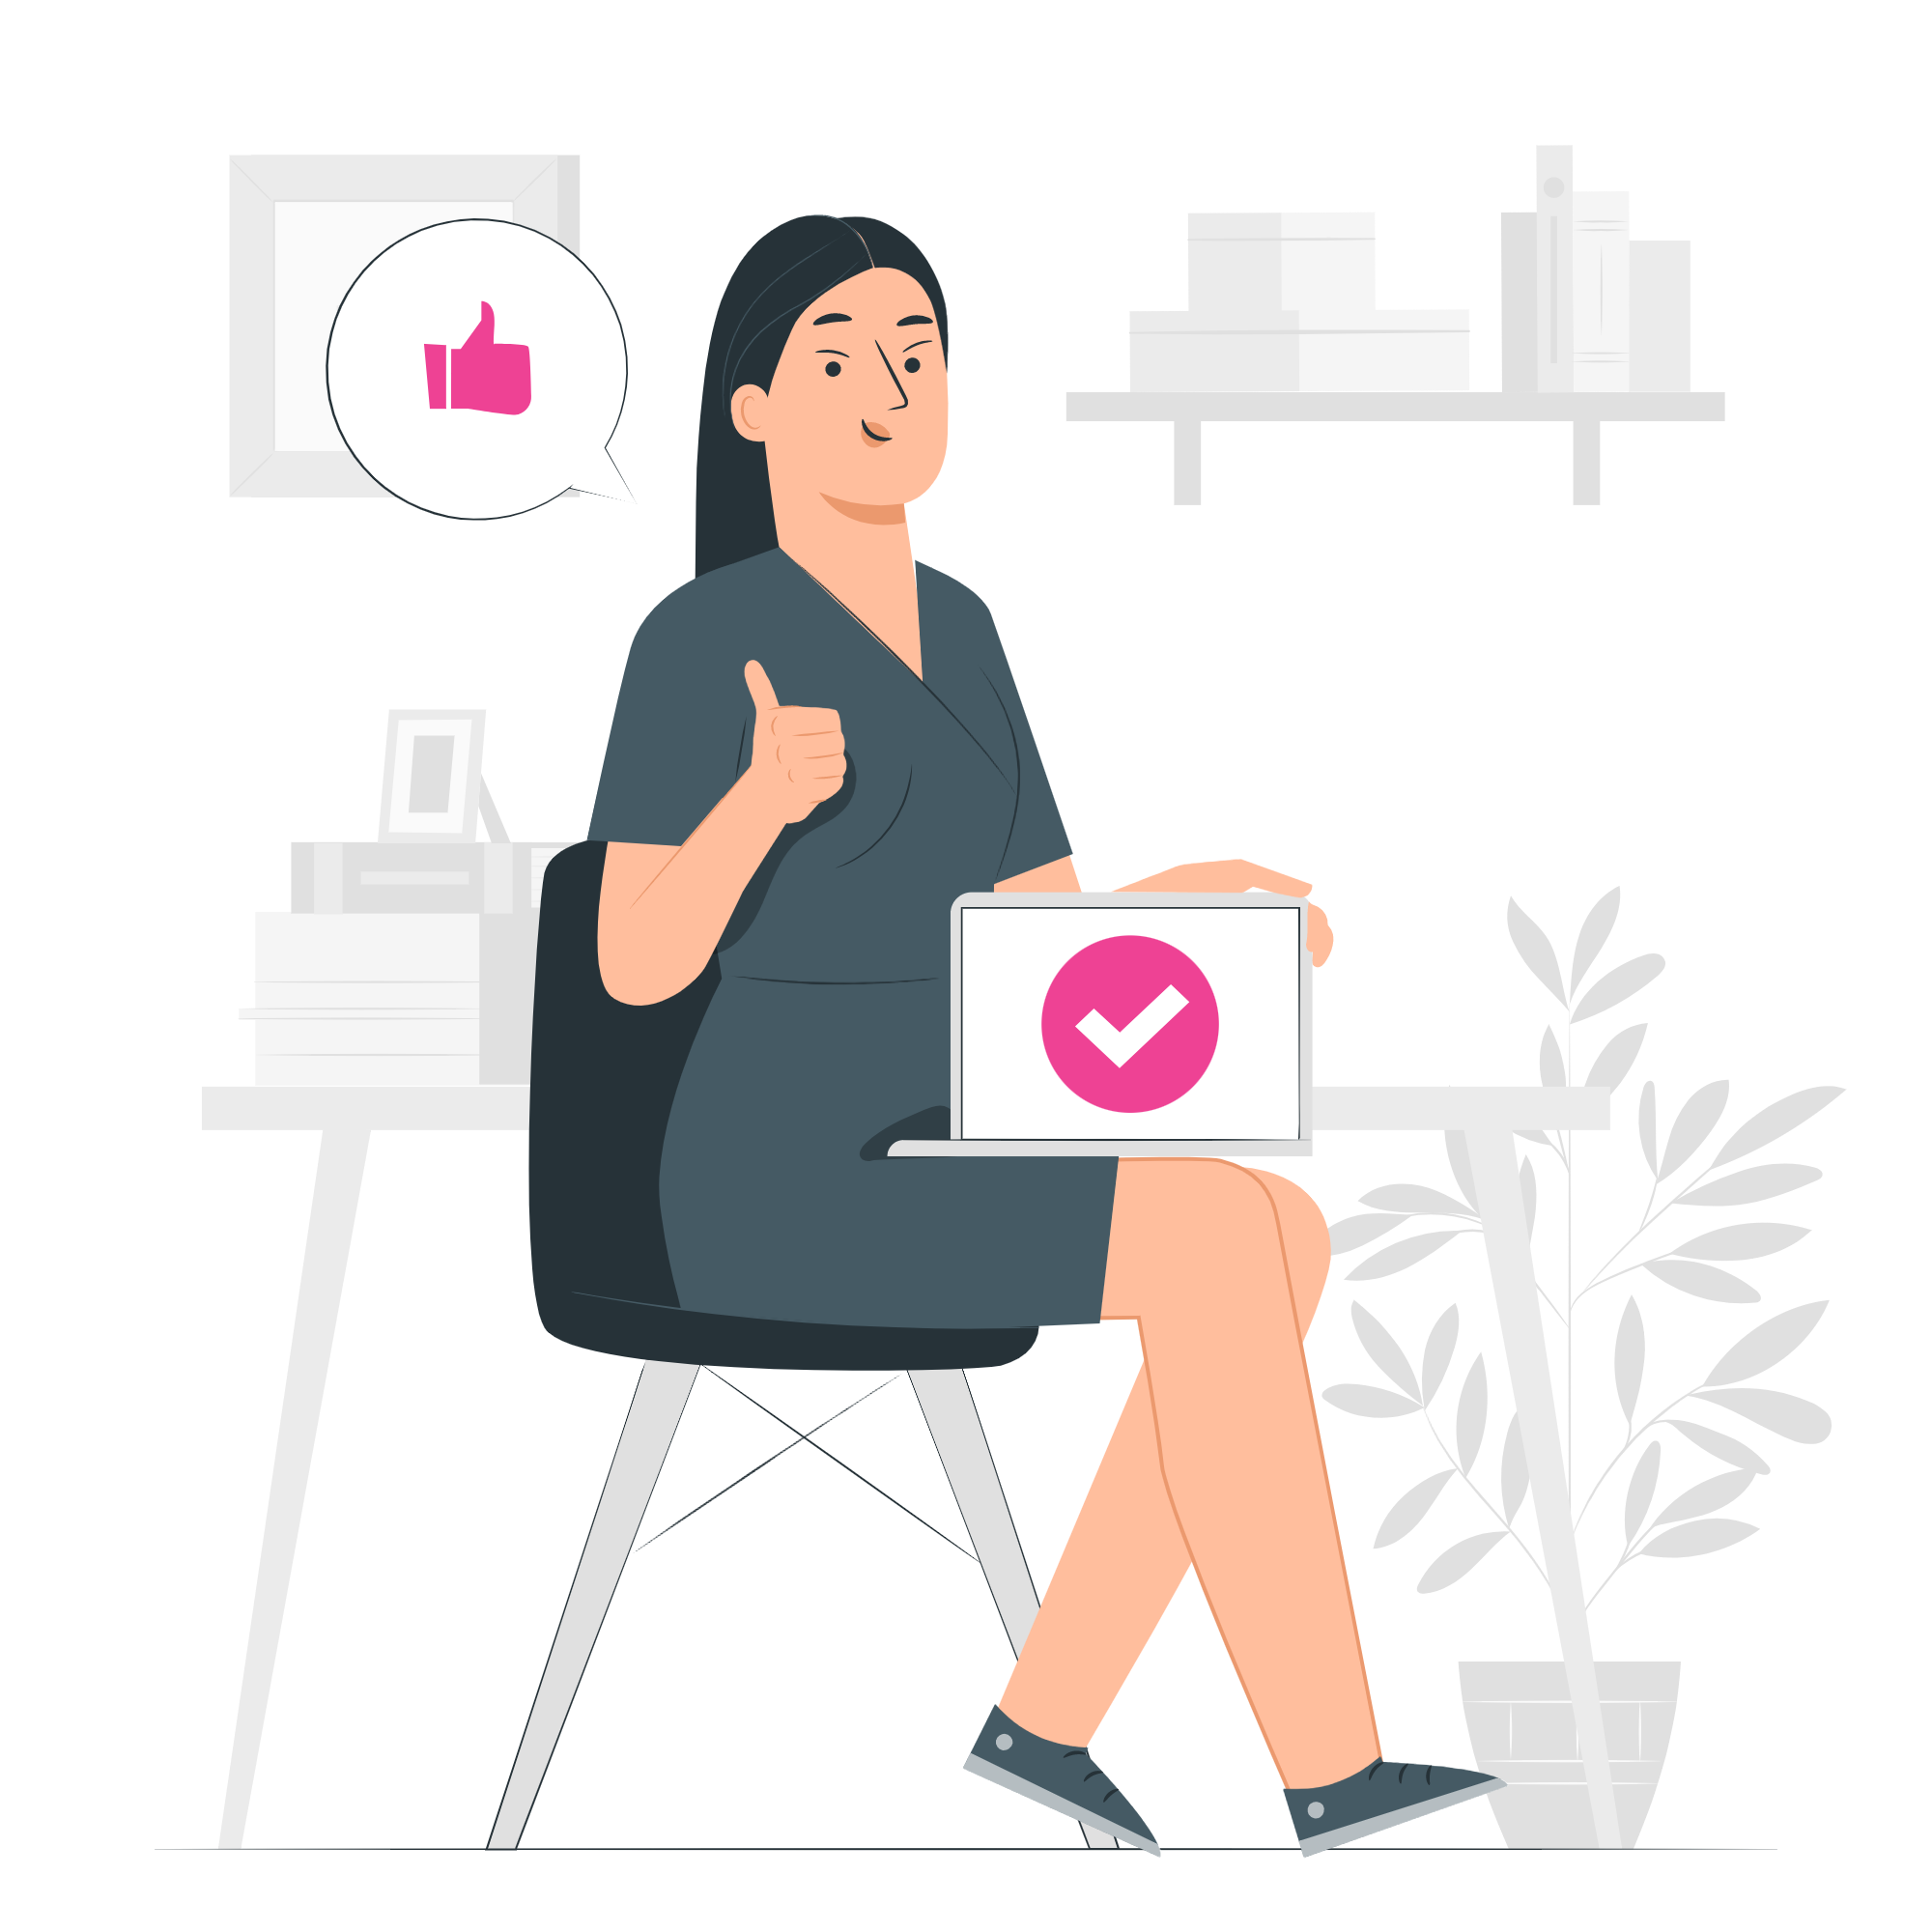 Illustrated woman sitting down and giving the thumbs up with a laptop in her lap